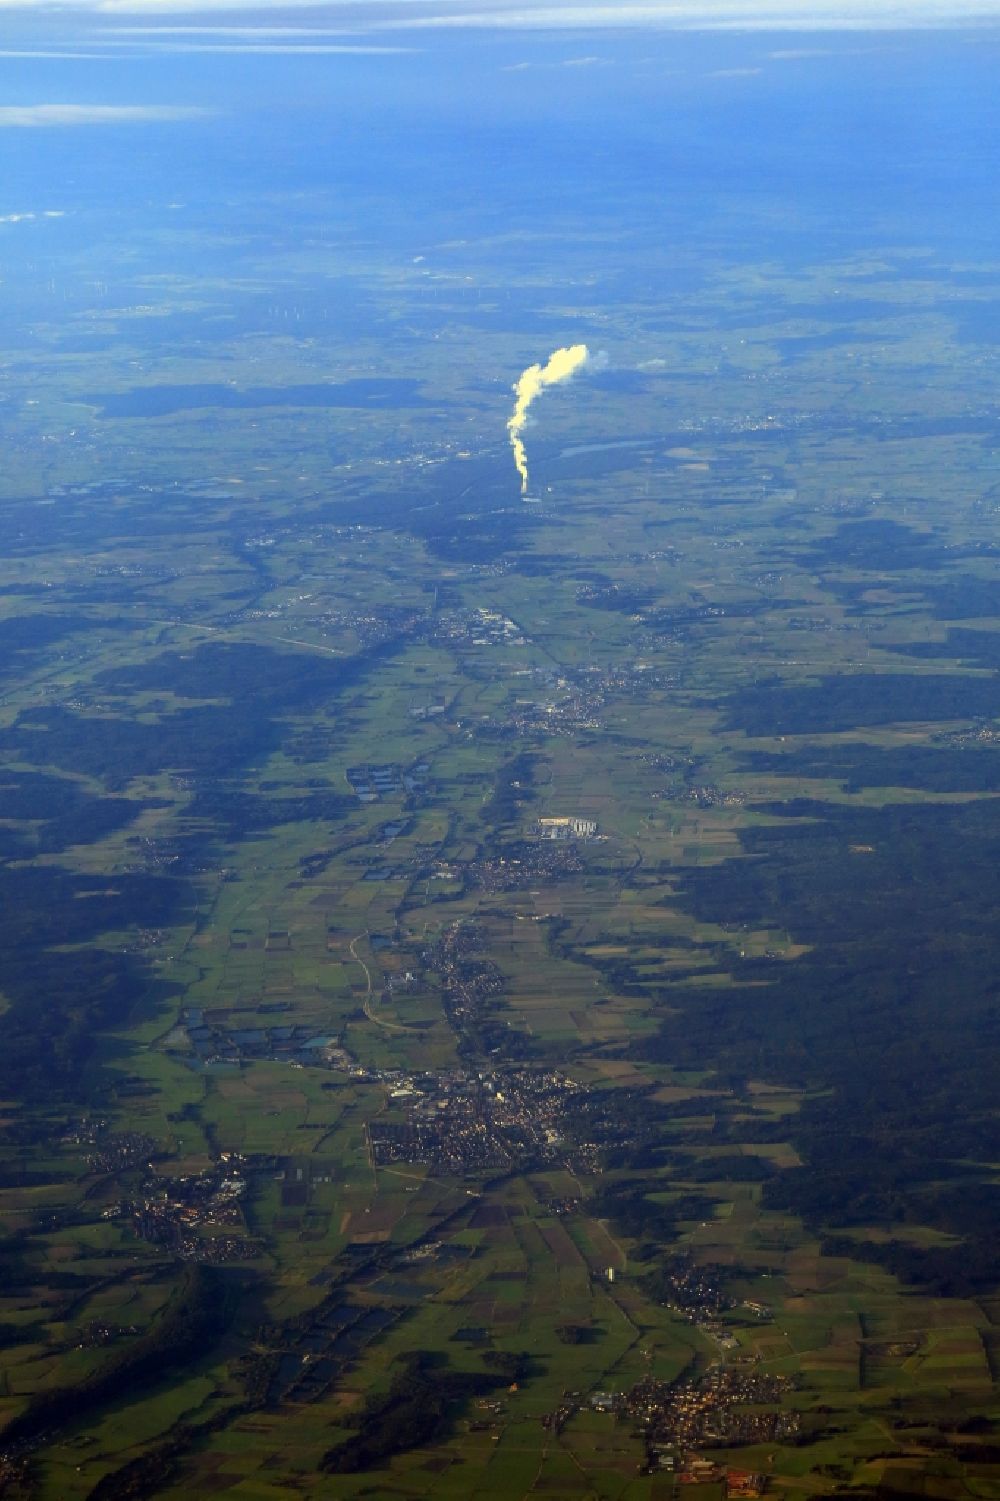 Gundremmingen from the bird's eye view: Steam column of the cooling tower of the NPP nuclear power plant in Gundremmingen in the landscape of rural district Guenzburg in the state Bavaria, Germany